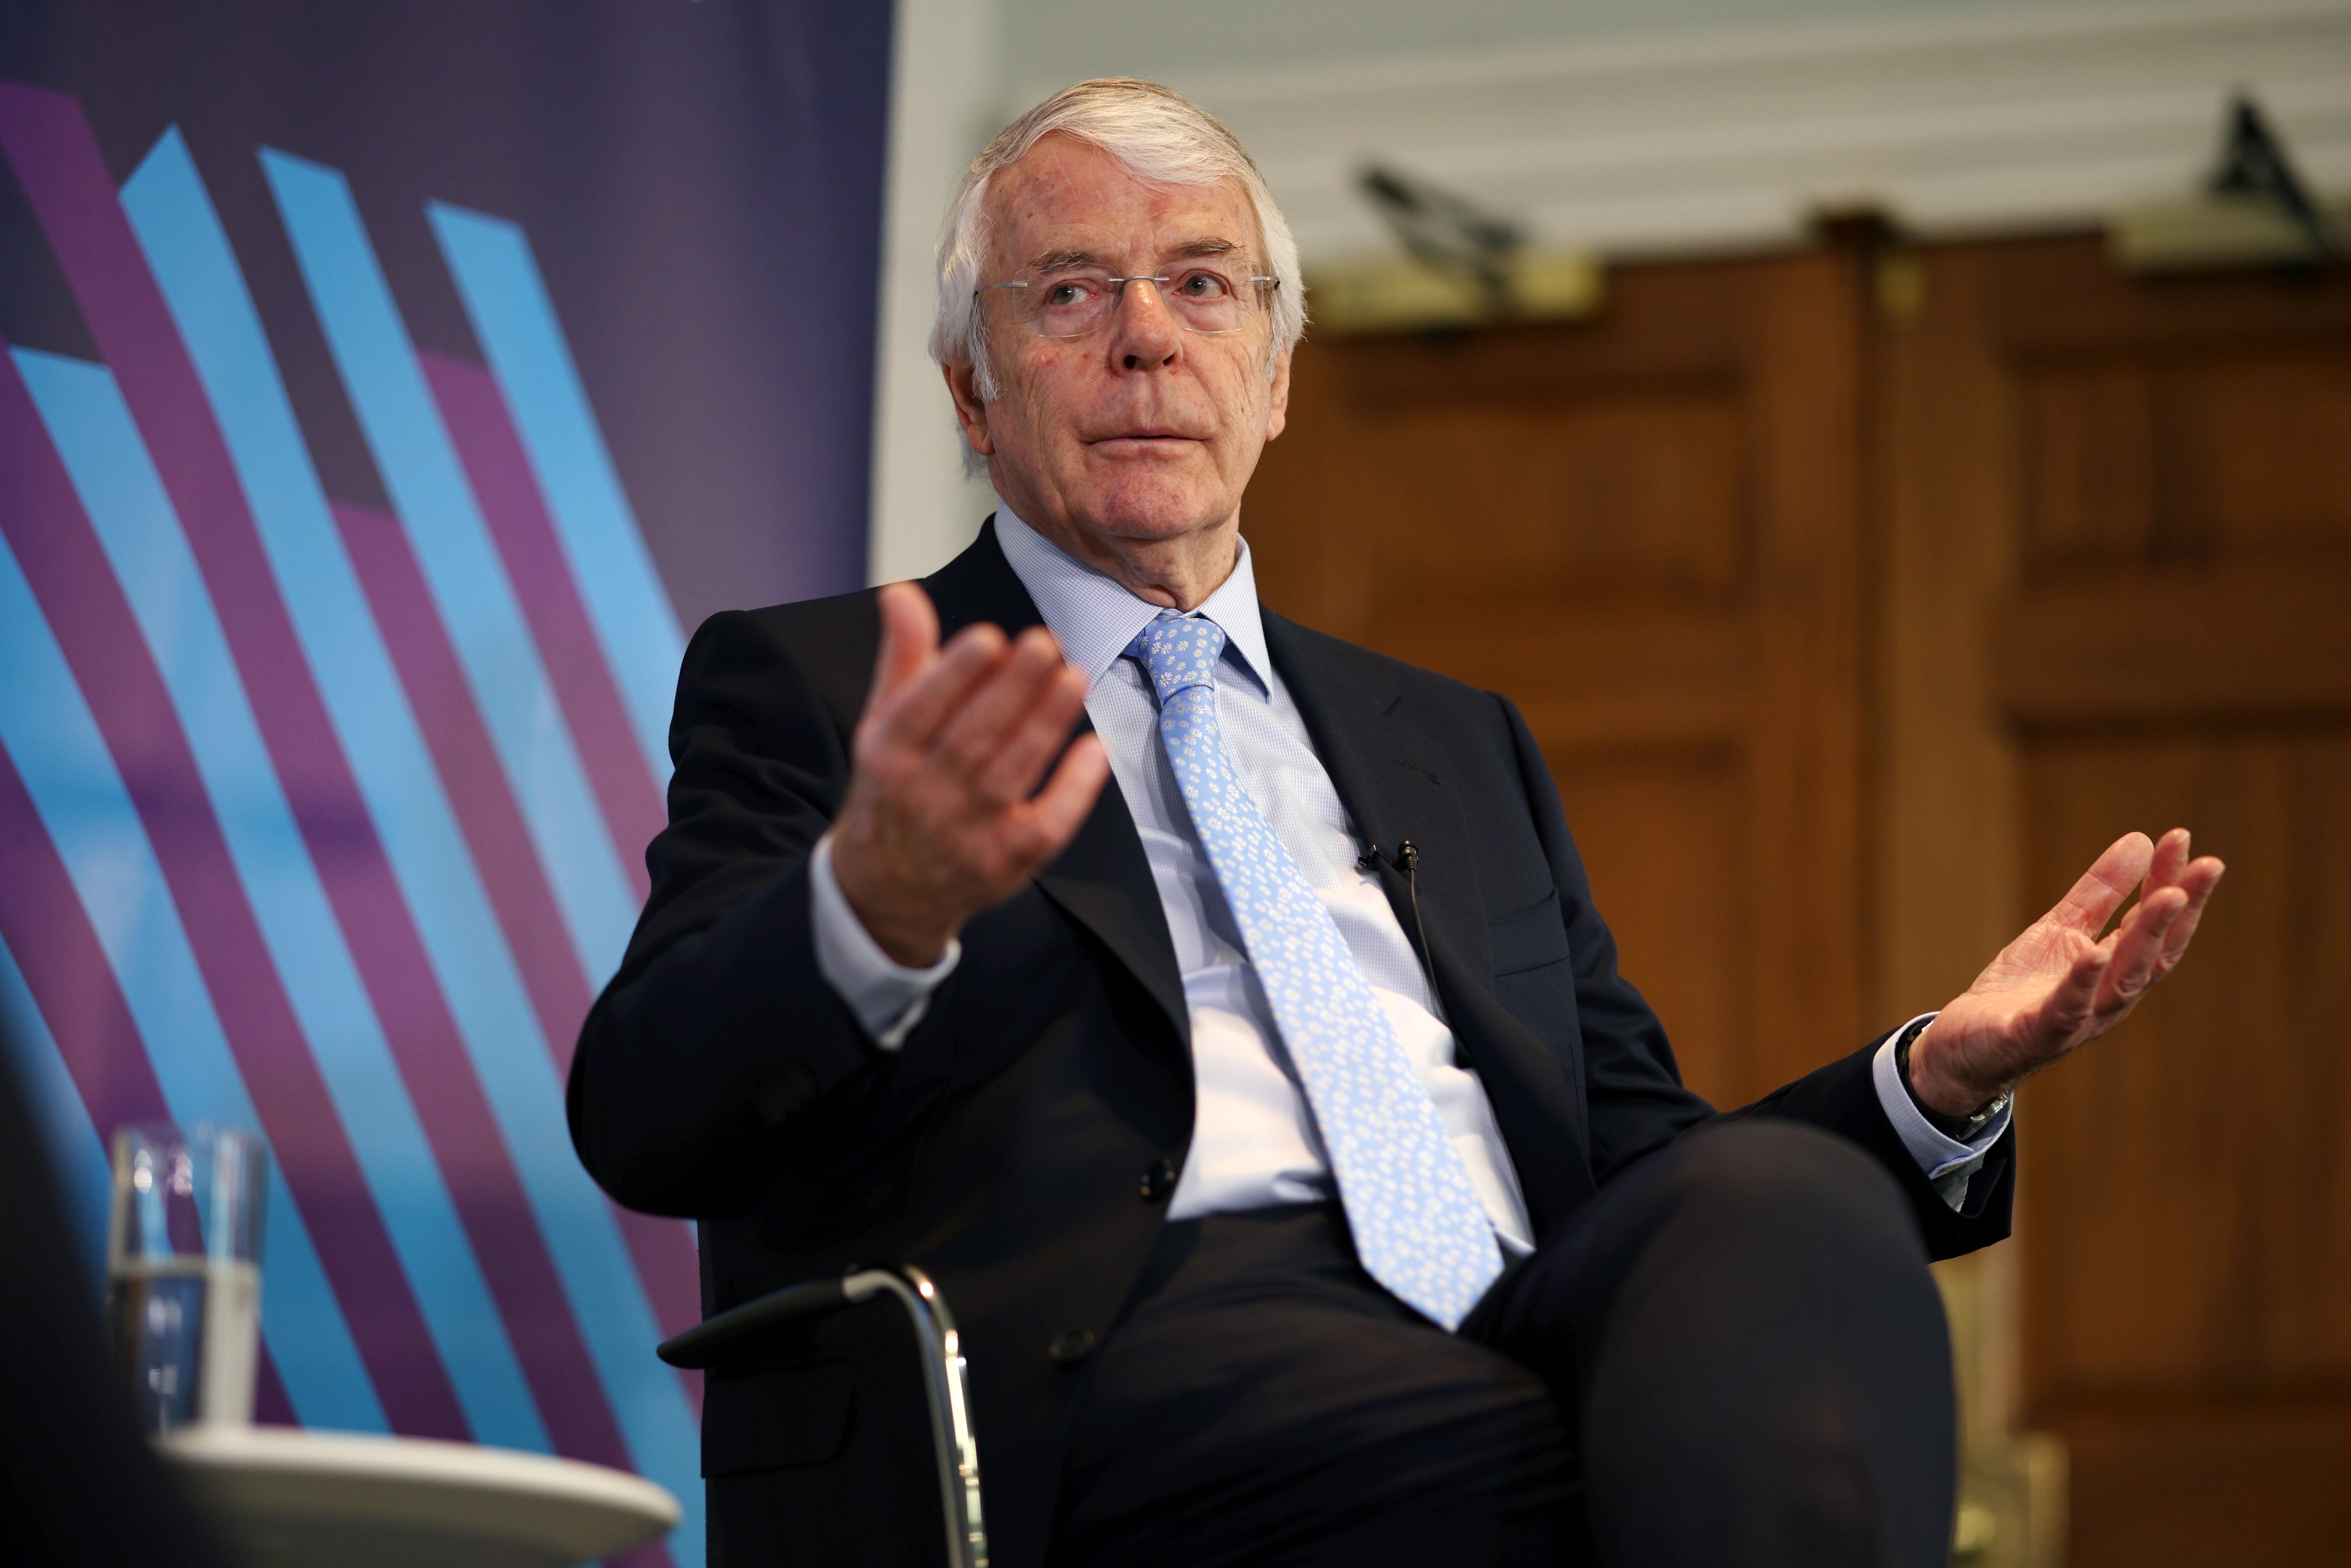 Sir John Major emerged, butterfly-like, from his chrysalis, some time ago